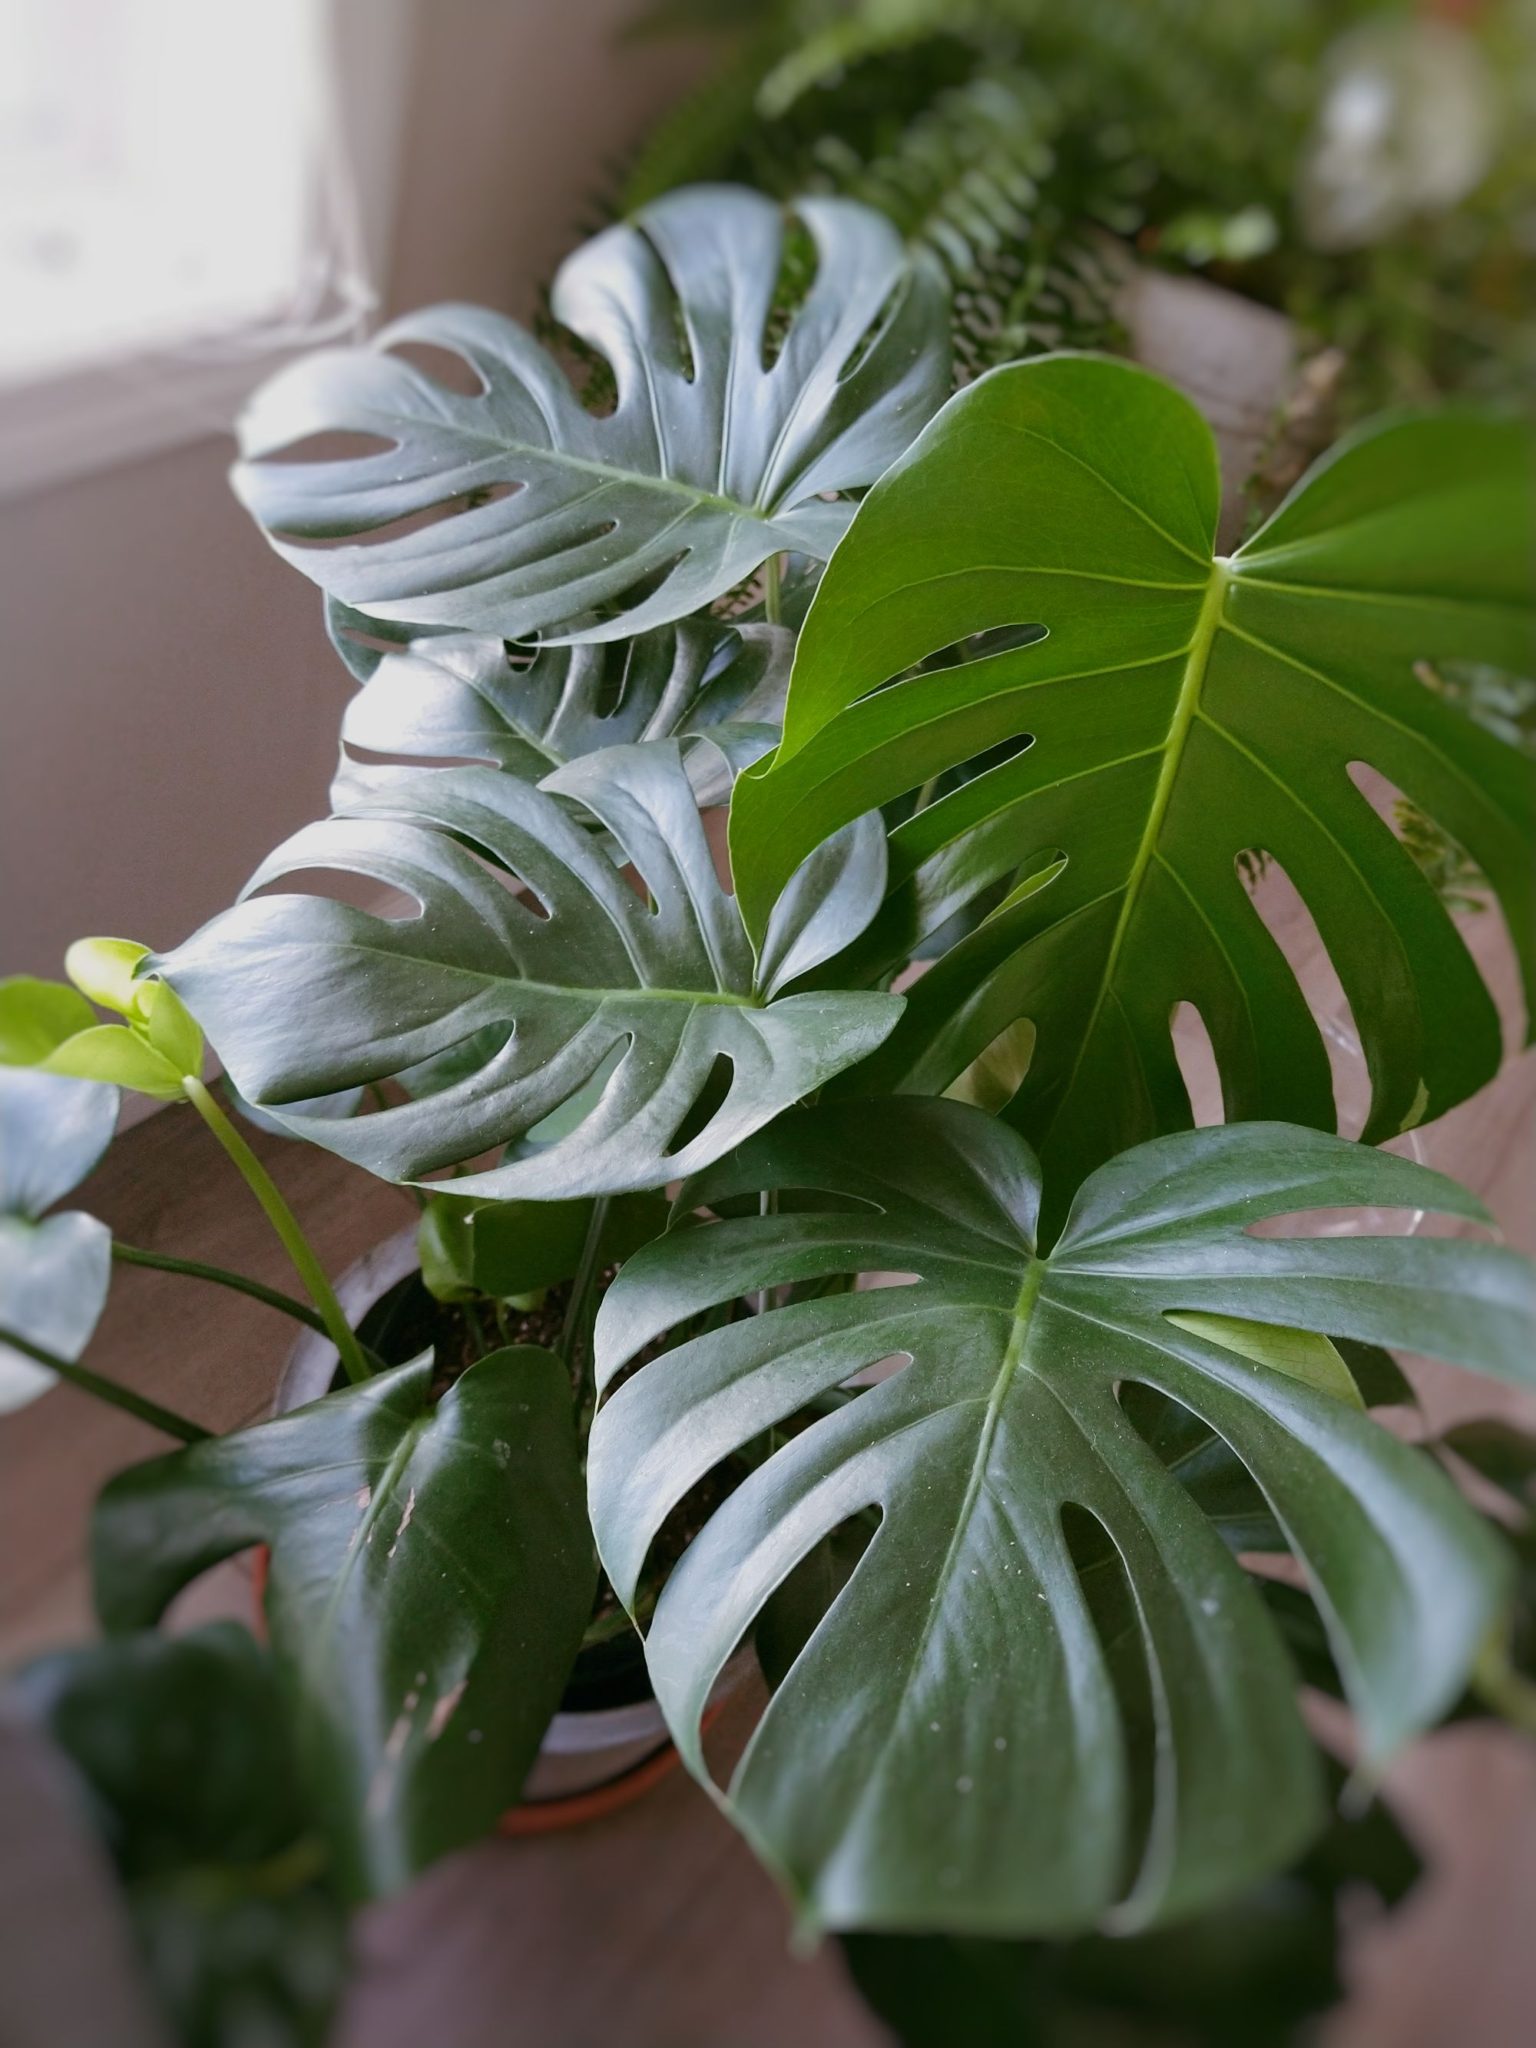 Easy Houseplants That Aren't Succulents! - Near to Nirvana